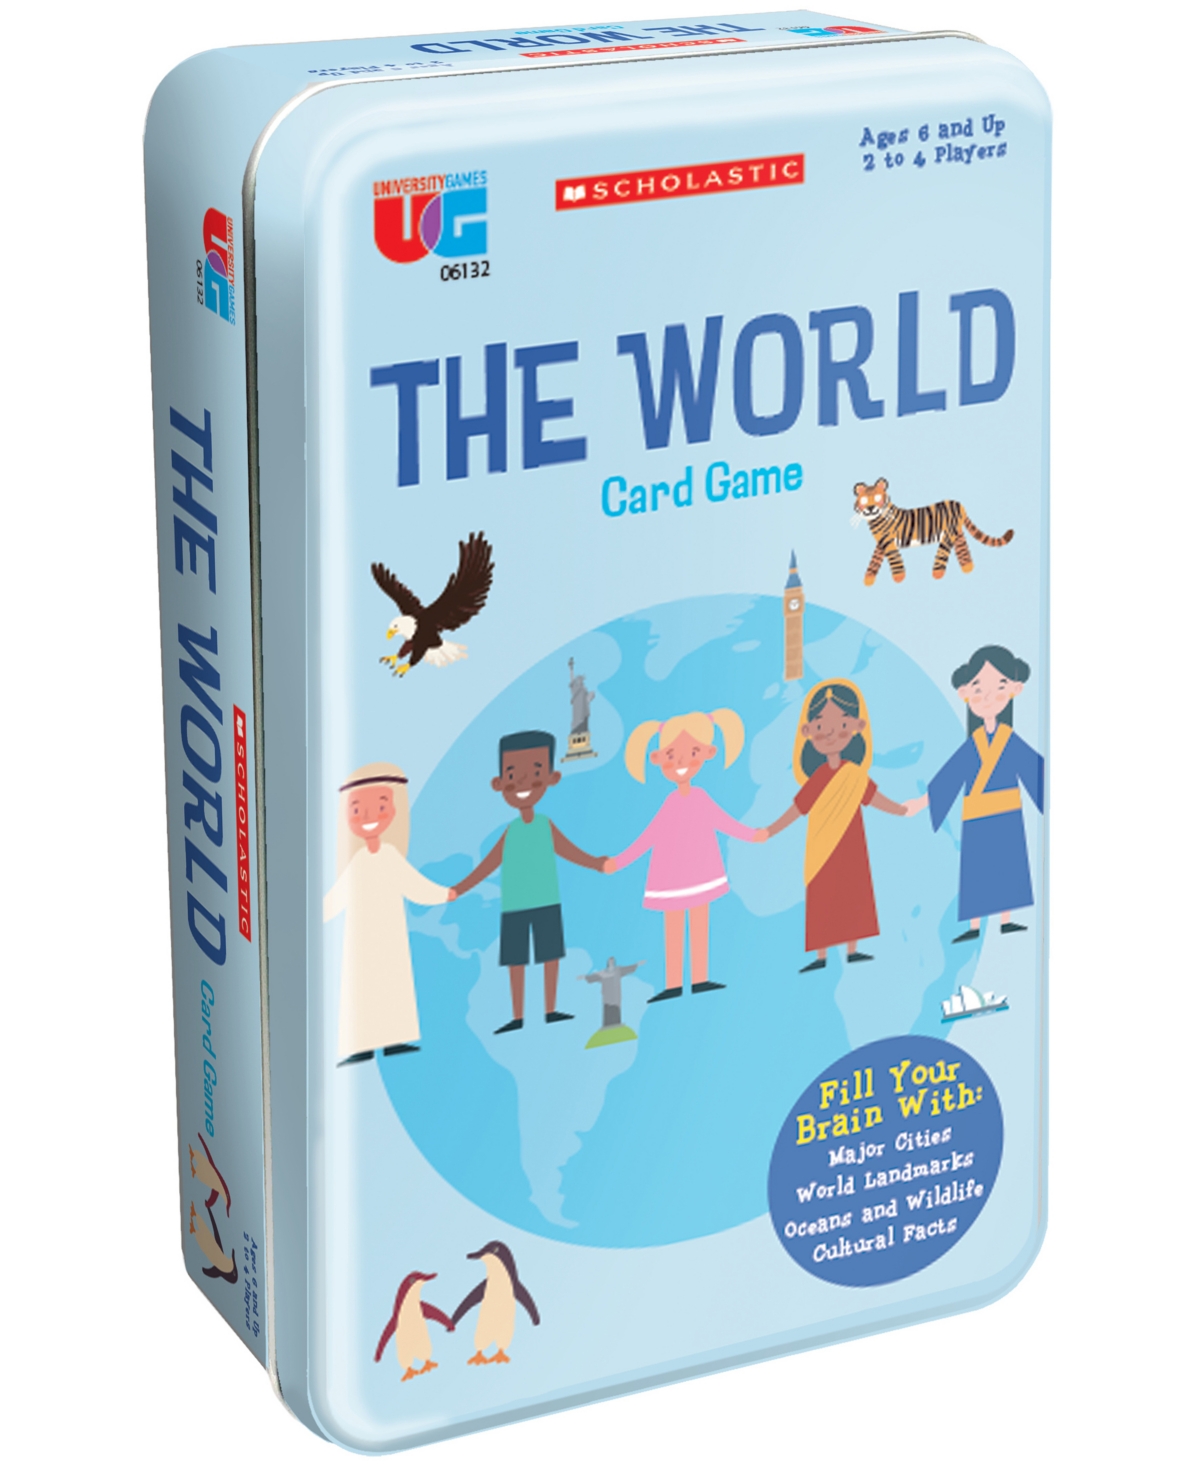 Areyougame Kids' University Games Scholastic The World Card Game In Multi Color